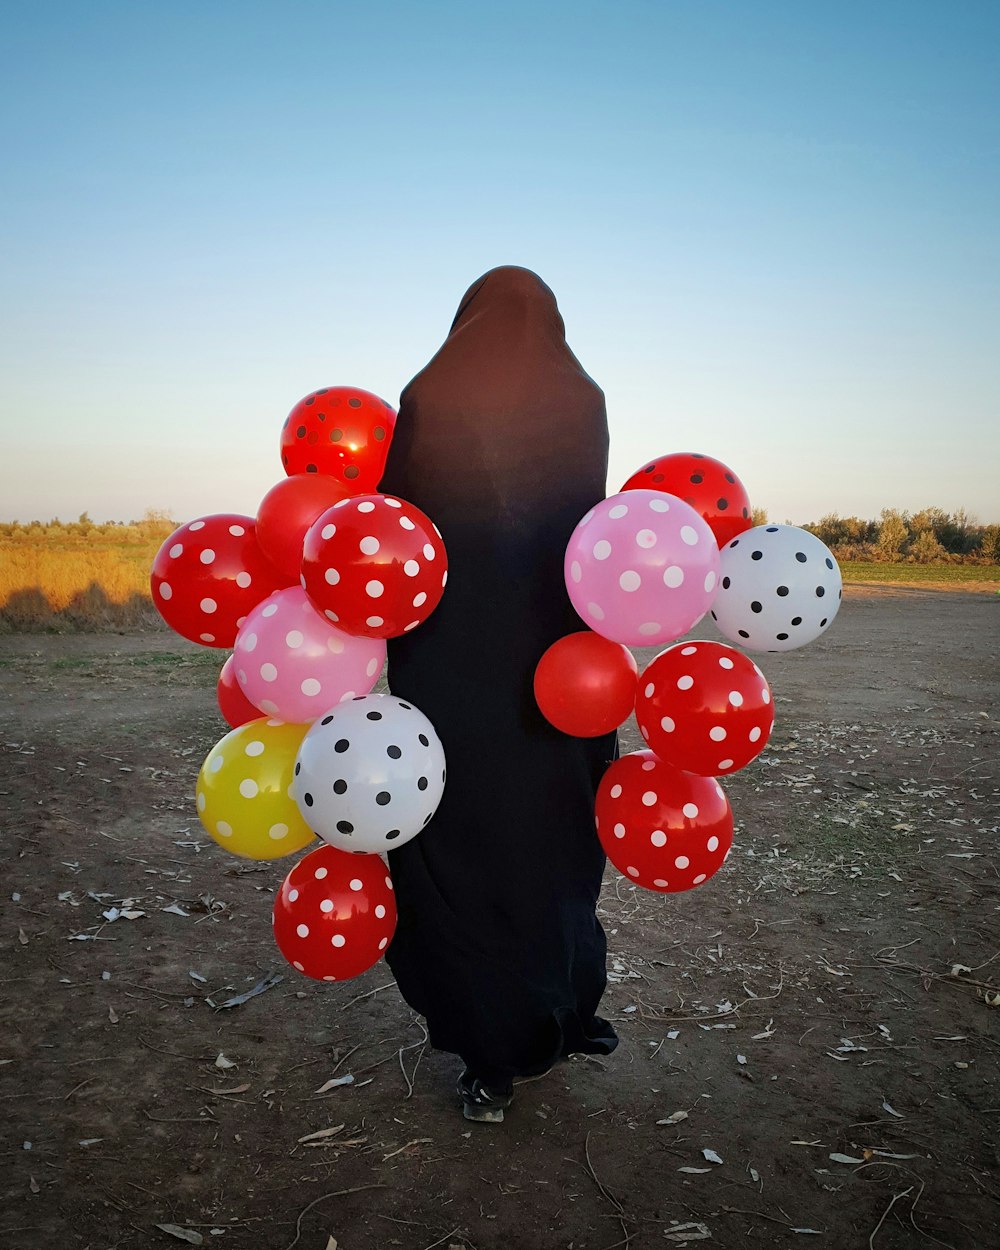 person holding red and white polka dot balloons